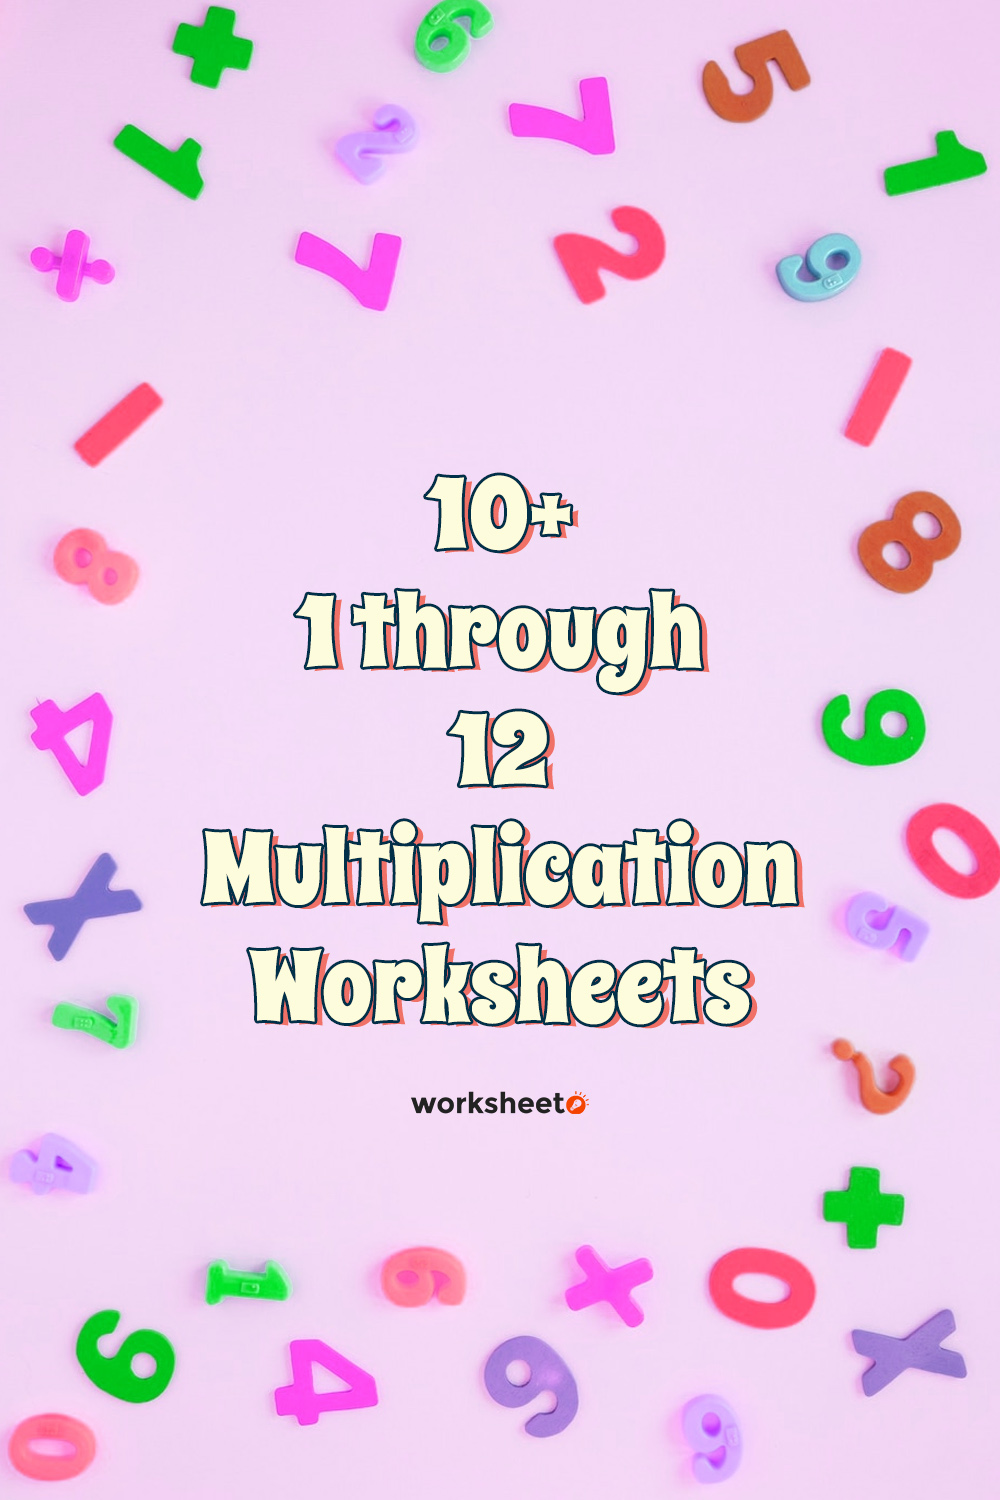 13 Images of 1 Through 12 Multiplication Worksheets